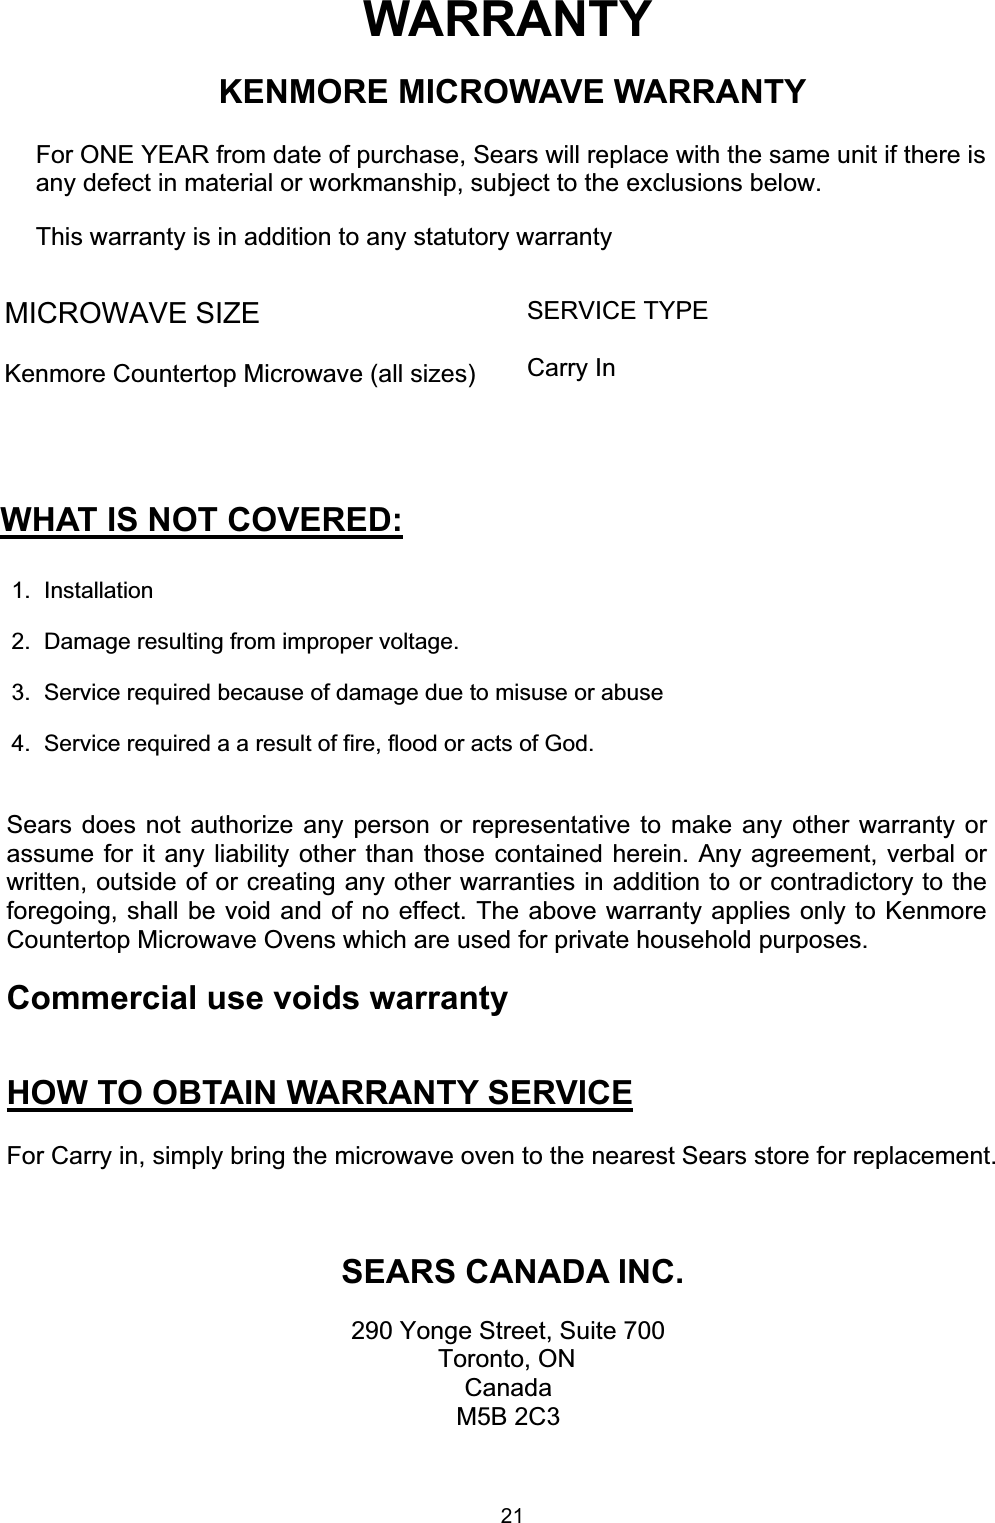 WARRANTYKENMORE MICROWAVE WARRANTY  For ONE YEAR from date of purchase, Sears will replace with the same unit if there isany defect in material or workmanship, subject to the exclusions below.  This warranty is in addition to any statutory warrantyMICROWAVE SIZEKenmore Countertop Microwave (all sizes)SERVICE TYPECarry InWHAT IS NOT COVERED:1. Installation2.  Damage resulting from improper voltage.3.  Service required because of damage due to misuse or abuse4.  Service required a a result of fire, flood or acts of God.Sears does not authorize any person or representative to make any other warranty orassume for it any liability other than those contained herein. Any agreement, verbal orwritten, outside of or creating any other warranties in addition to or contradictory to theforegoing, shall be void and of no effect. The above warranty applies only to KenmoreCountertop Microwave Ovens which are used for private household purposes.Commercial use voids warrantyHOW TO OBTAIN WARRANTY SERVICEFor Carry in, simply bring the microwave oven to the nearest Sears store for replacement.SEARS CANADA INC.290 Yonge Street, Suite 700Toronto, ONCanadaM5B 2C321